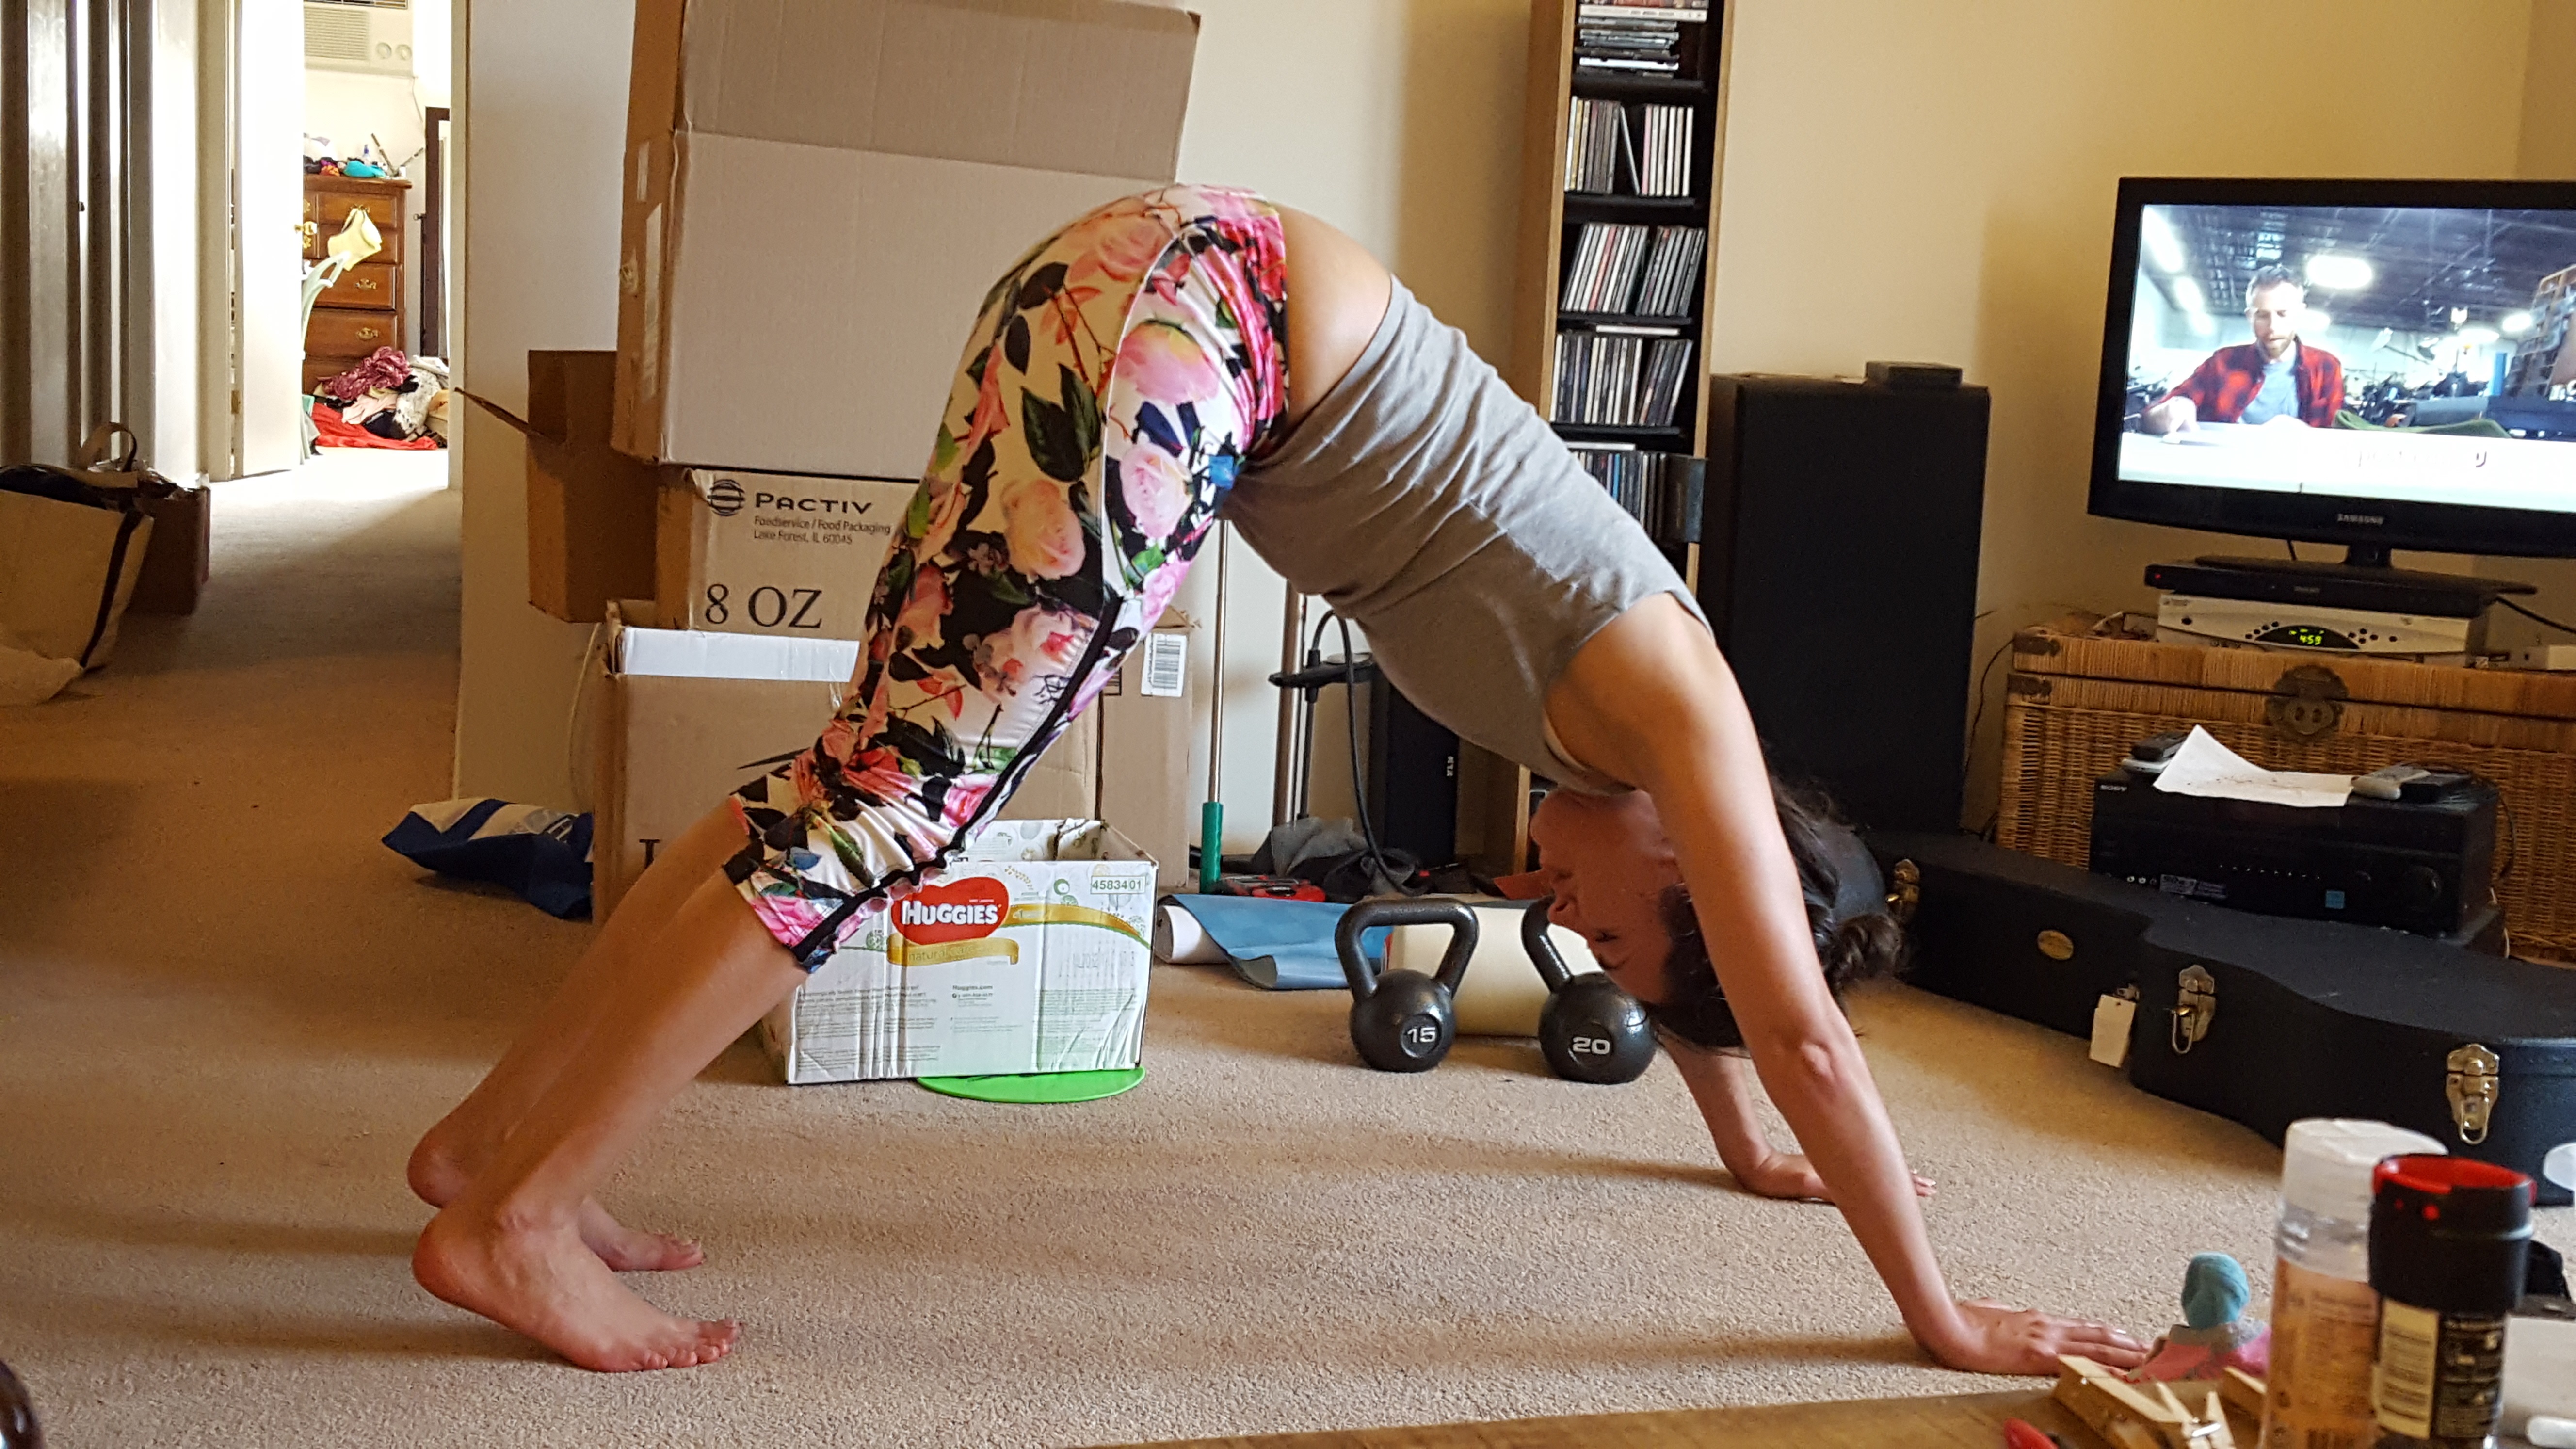 Kerry with a bunch of boxes around her wearing floral leggings and a grey tank top pushing her hips up to the sky forming a triangle with her feet and hands on the floor and hips in the air.